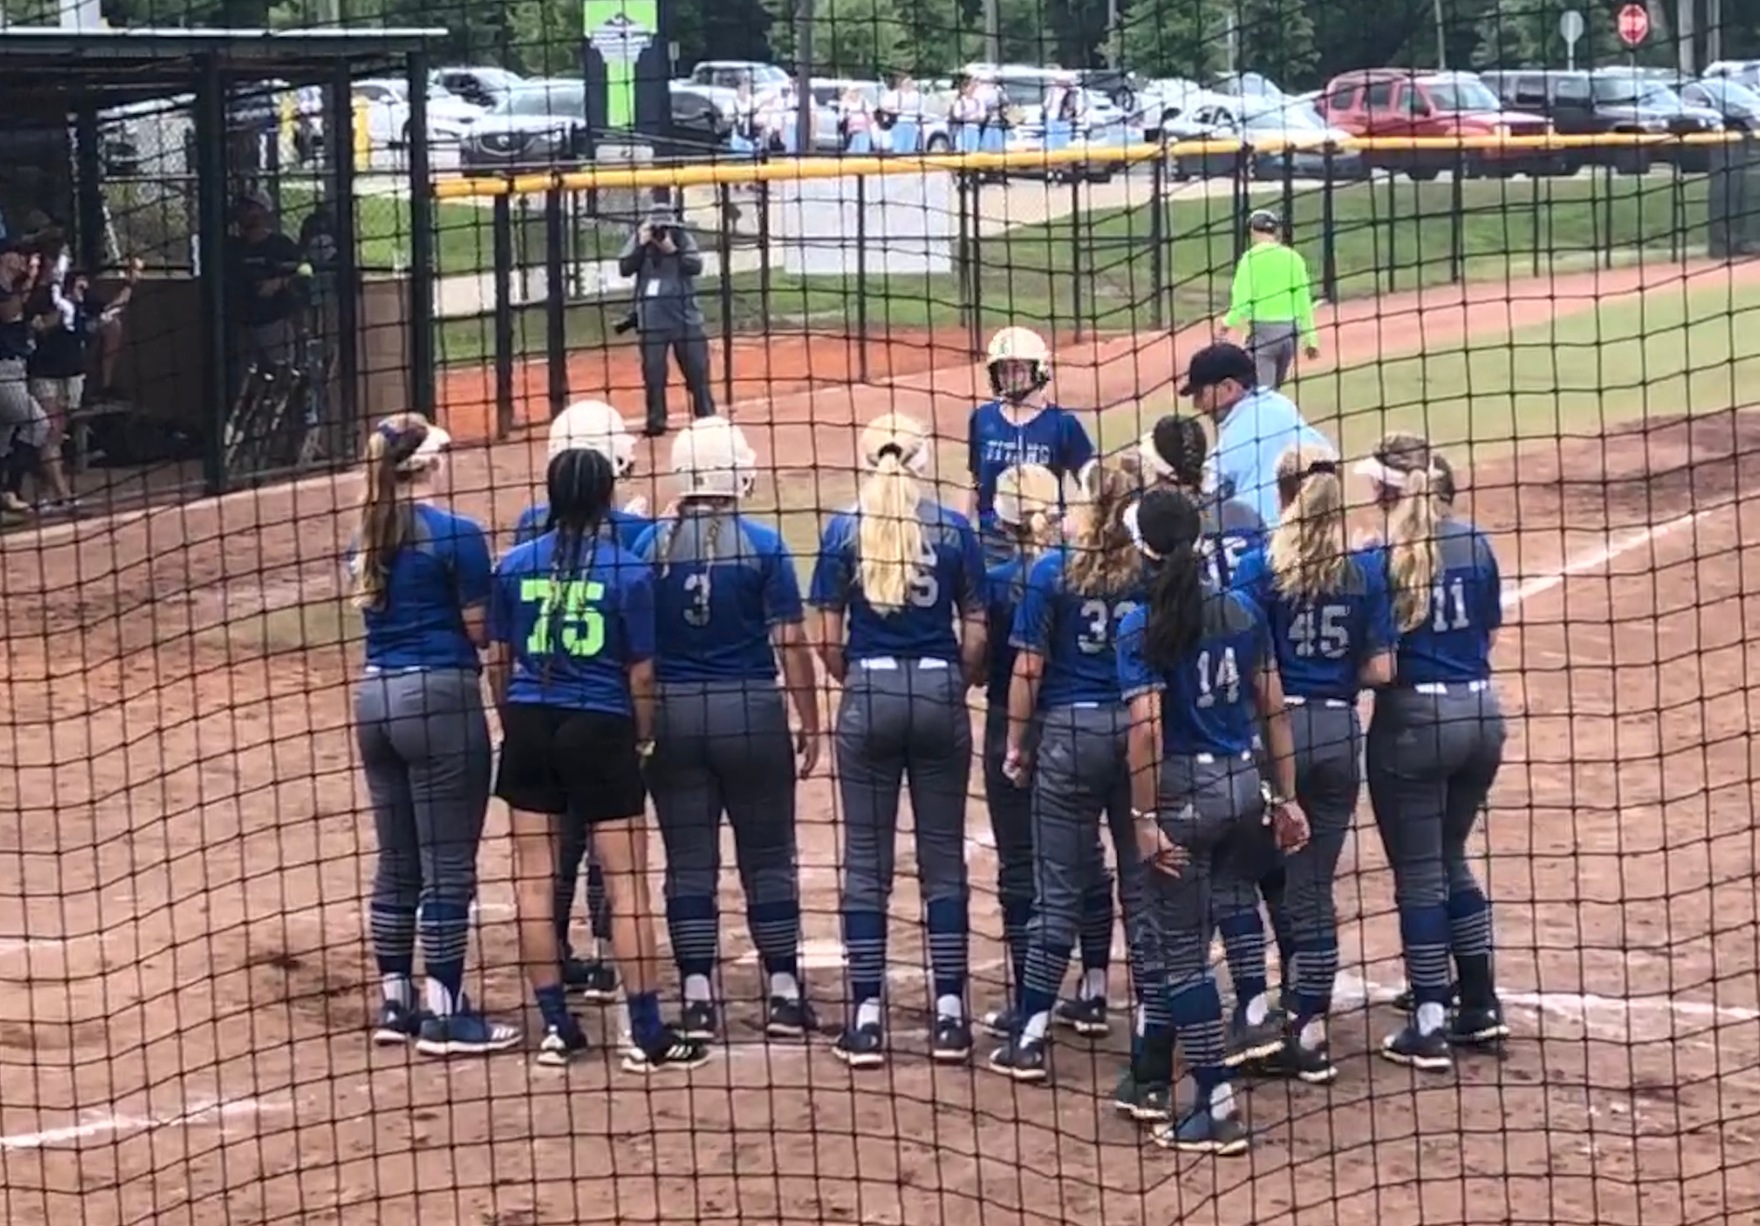 Softball team falls at state tourney, finishes year with 31 wins